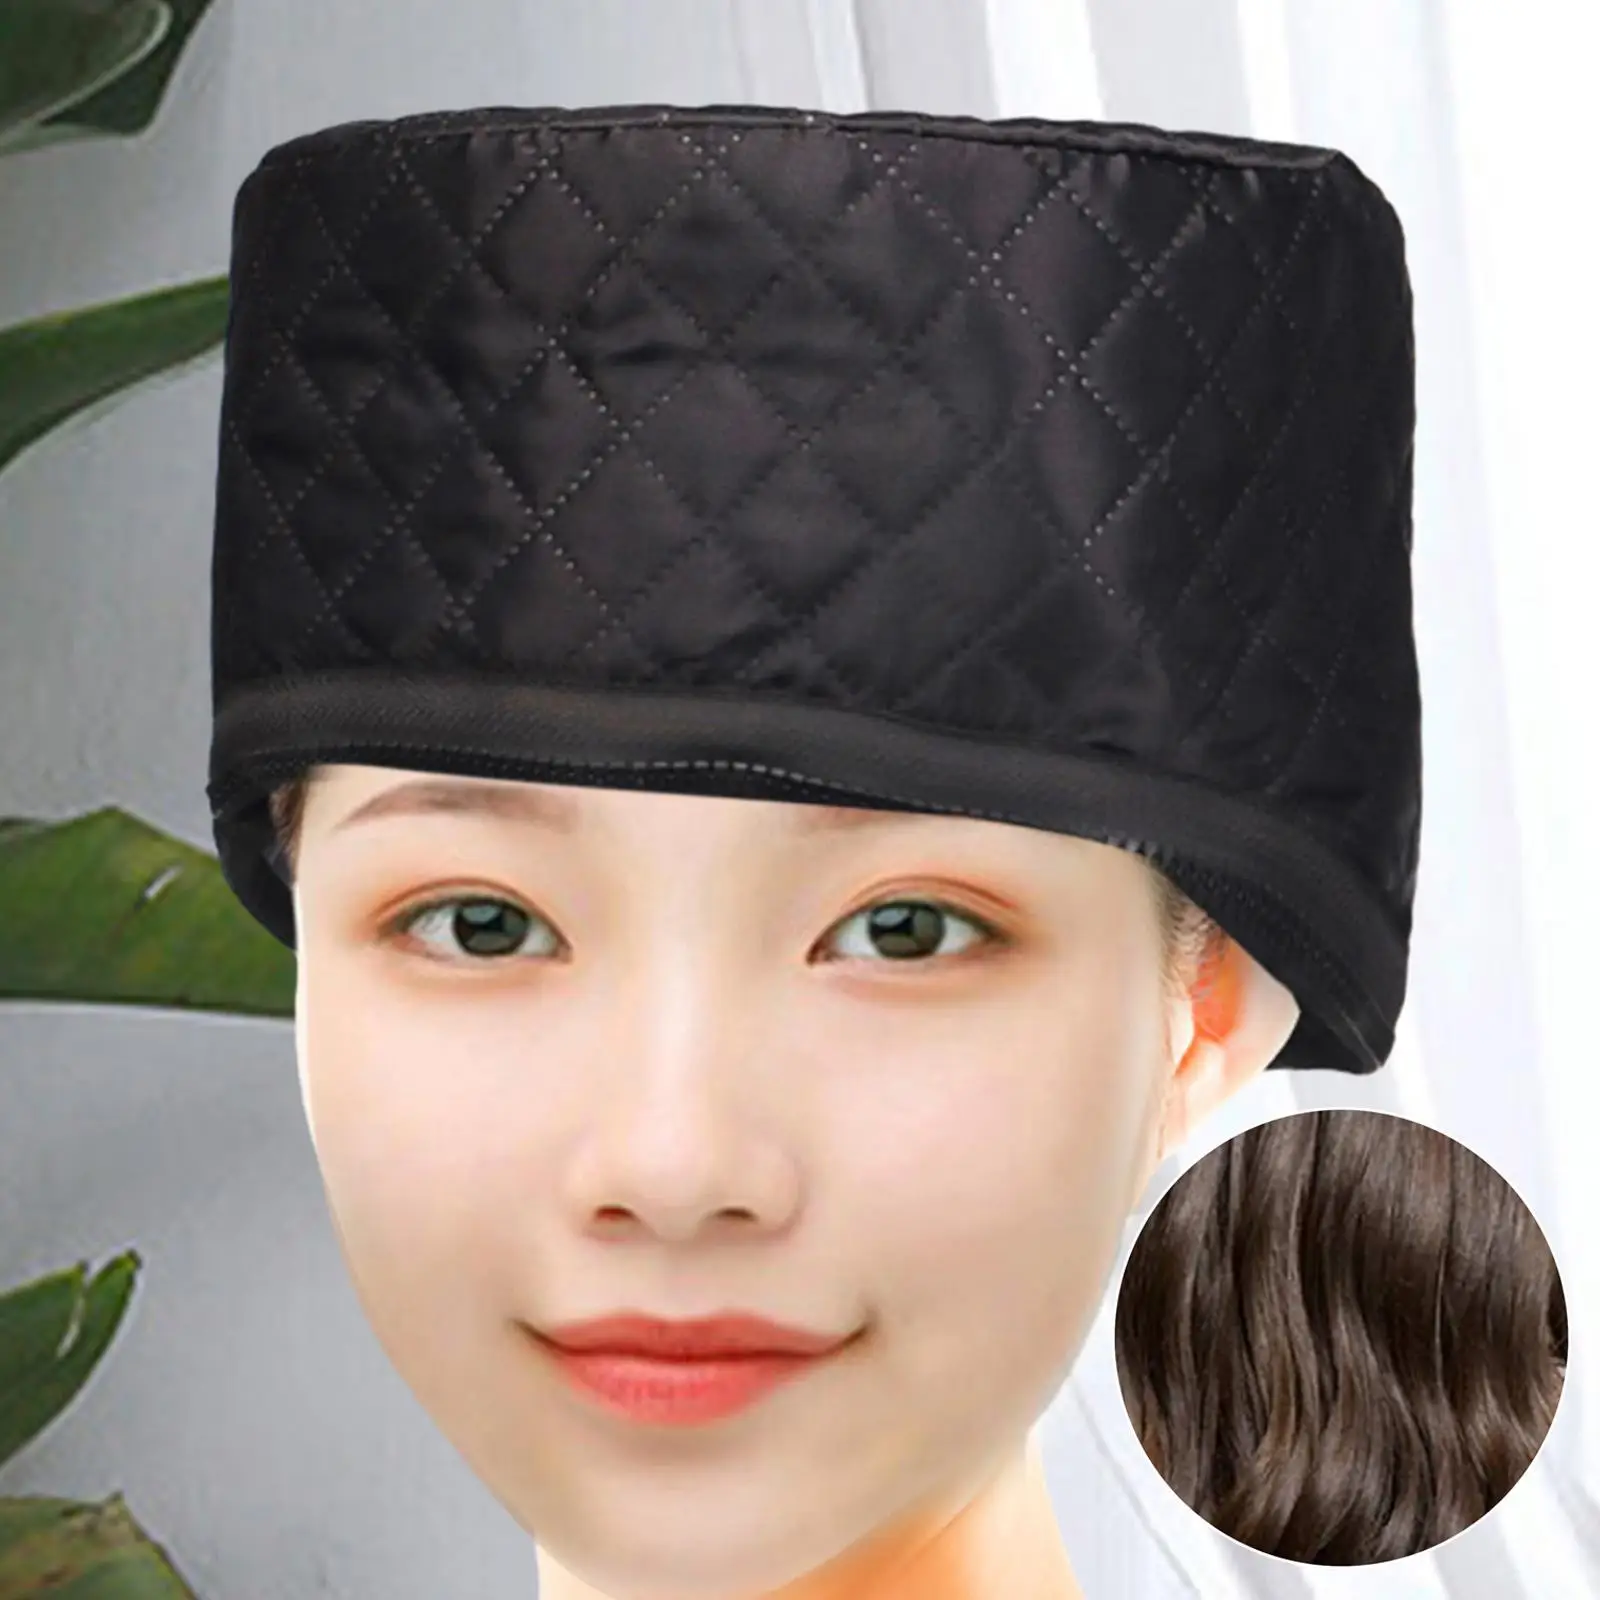 Heat Cap Adjustable Reusable Portable Thermal Cap for Hair Hair Steamer Cap for Hair Dyeing Barbershop Oil Baking Home Use Salon